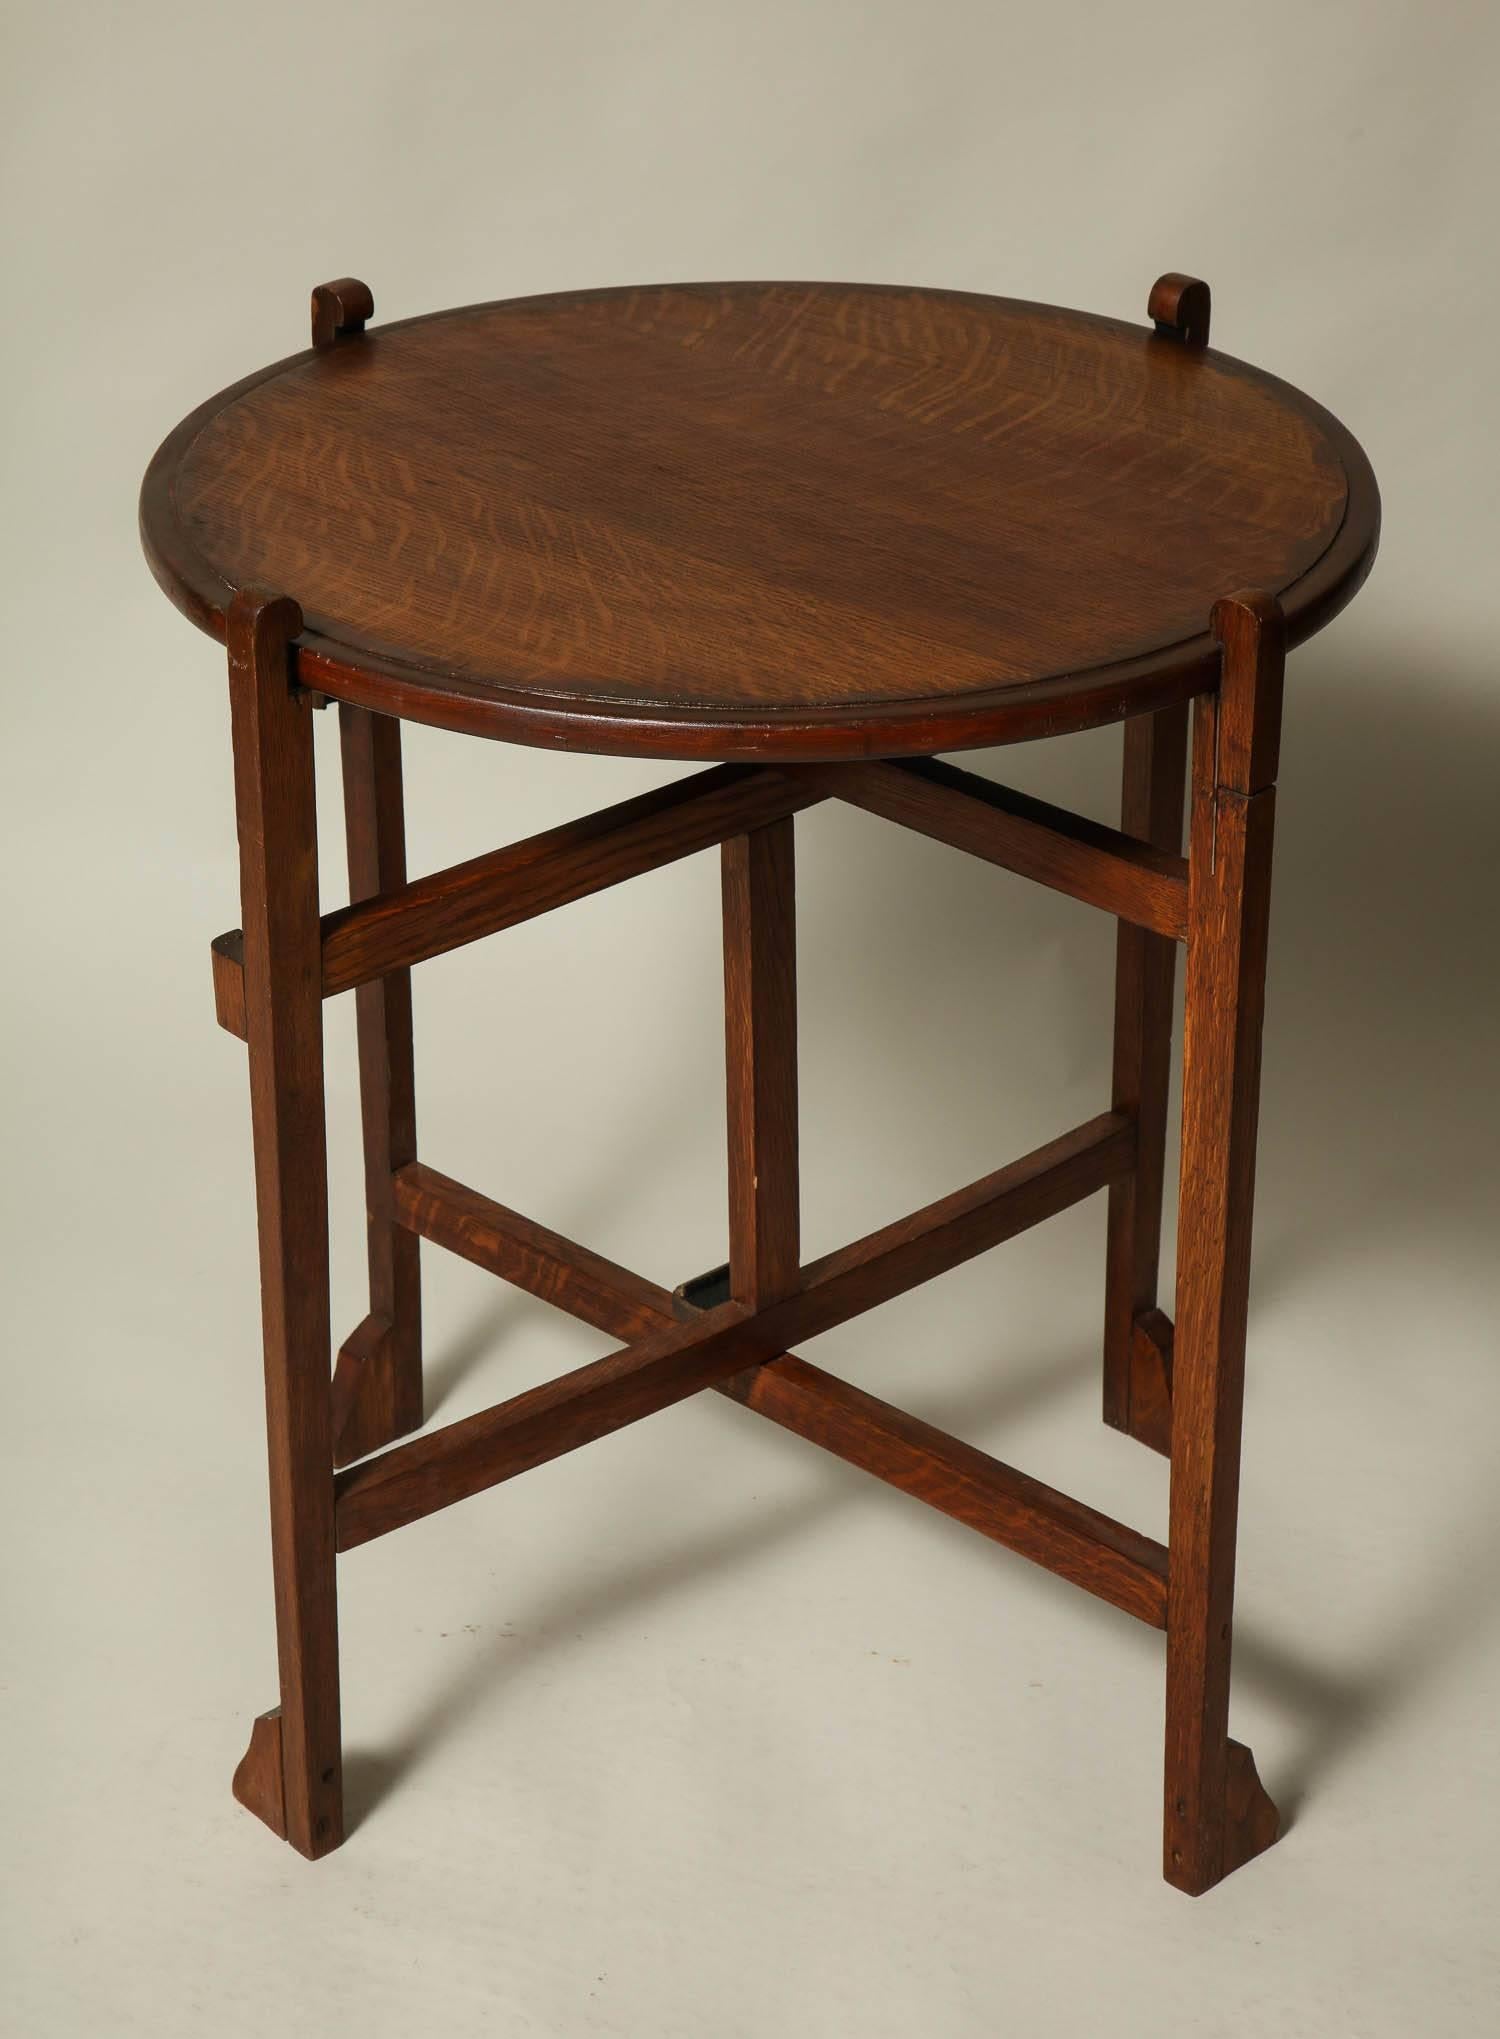 English 1930s oak circular tray Butler's table, the reversible top having quarter sawn oak on one side and a felt lined tray on the other, the base made to fold away and the top fully removable to use for serving, but can also remain while table is